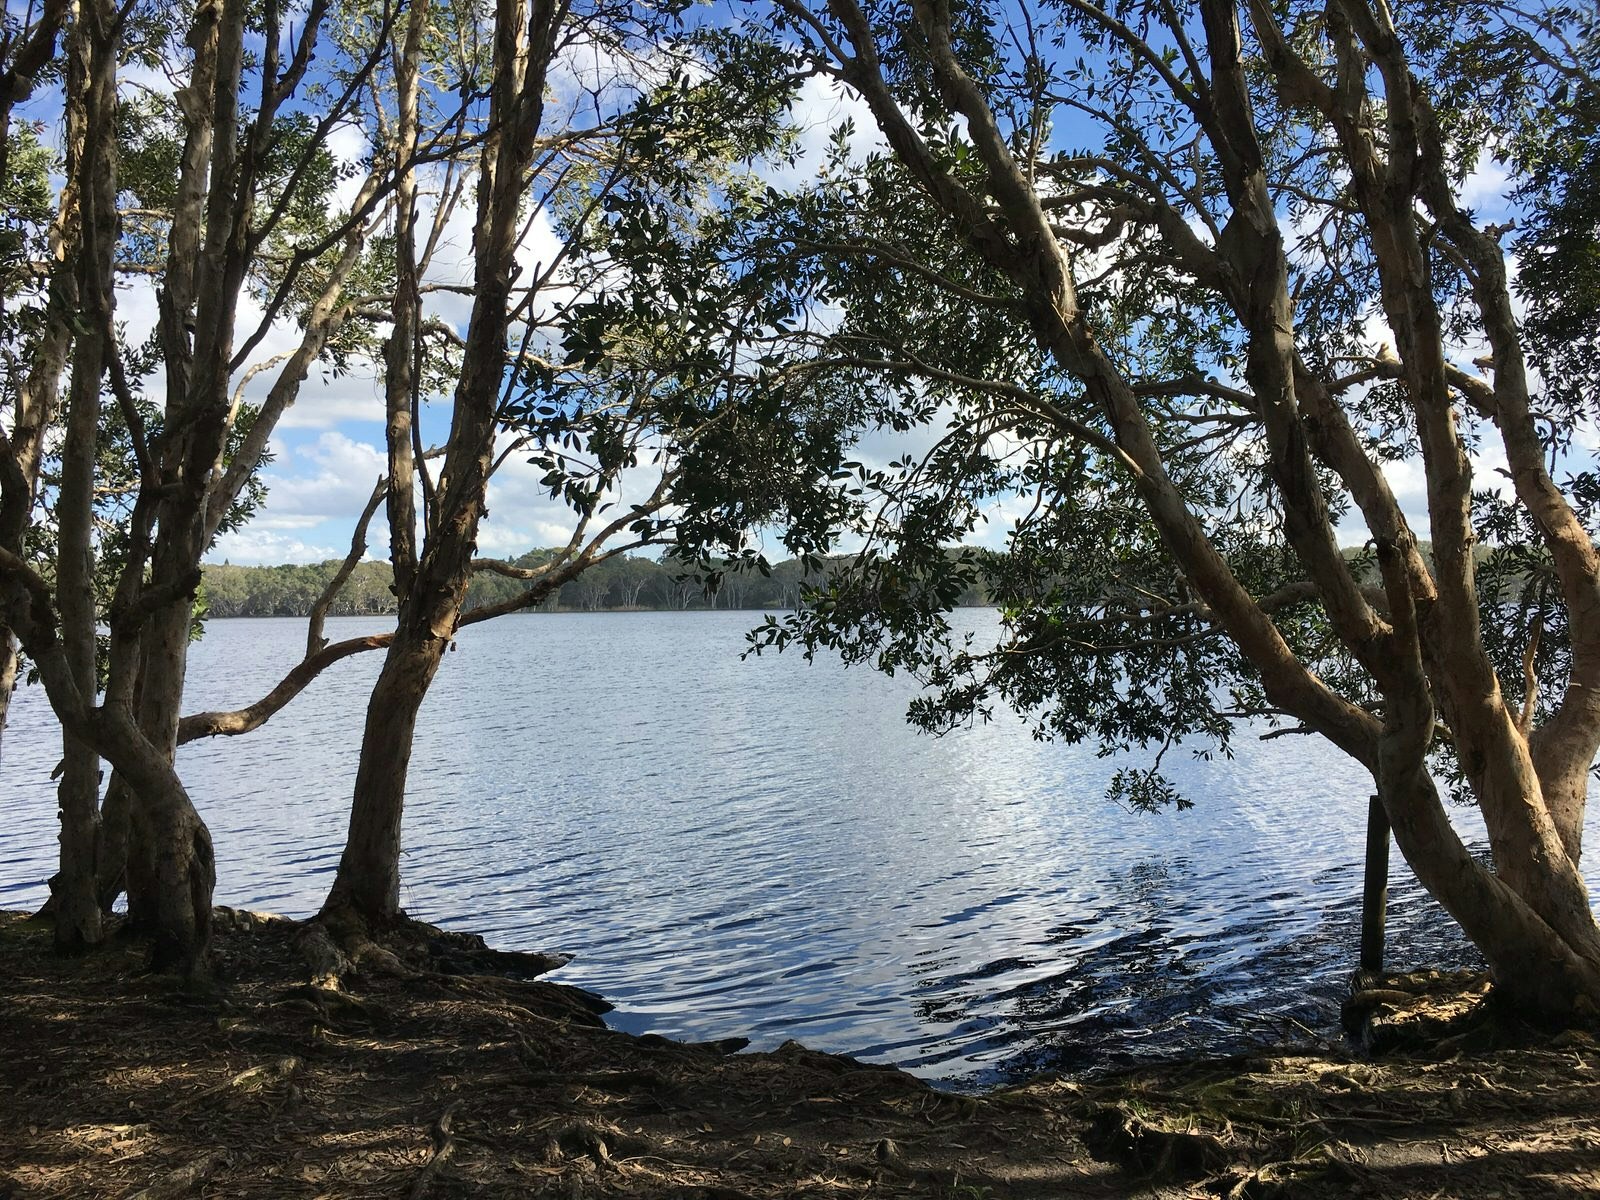 Lake Ainsworth in Lennox Head gently ripples under a blue sky framed by some deciduous trees